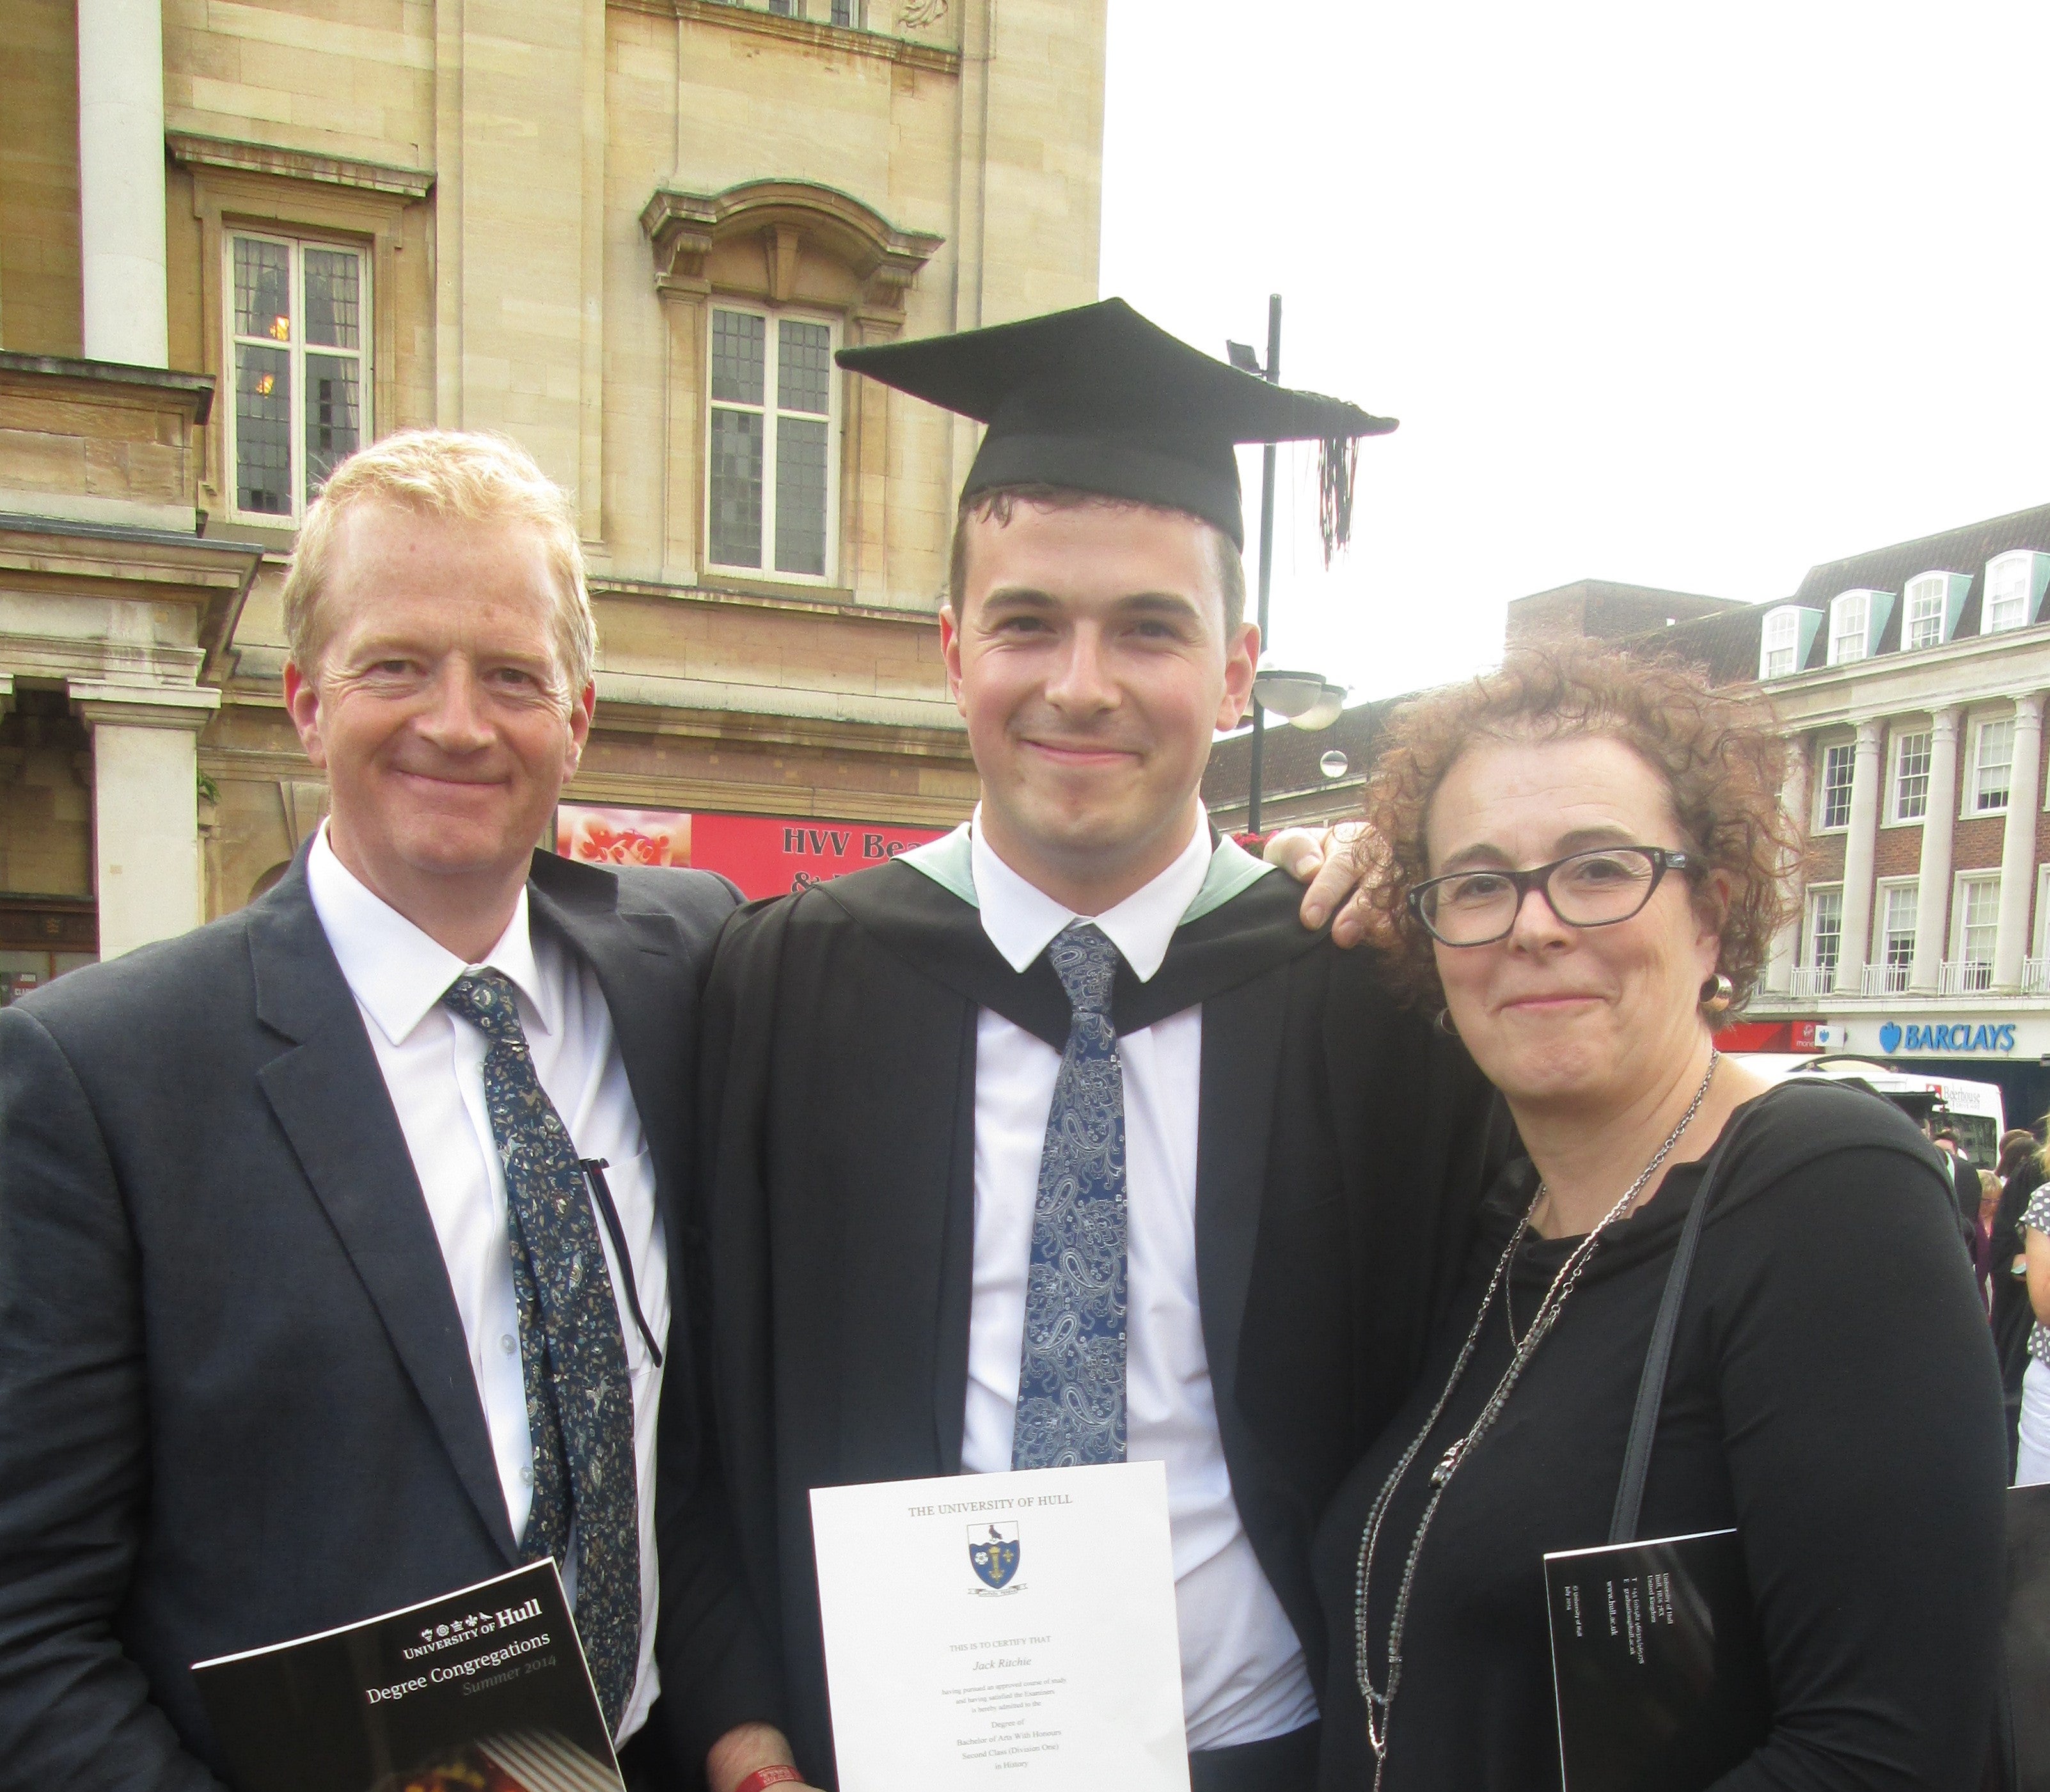 Jack Ritchie at his graduation with his parents Charles and Liz Ritchie. (Gambling With Lives/PA)